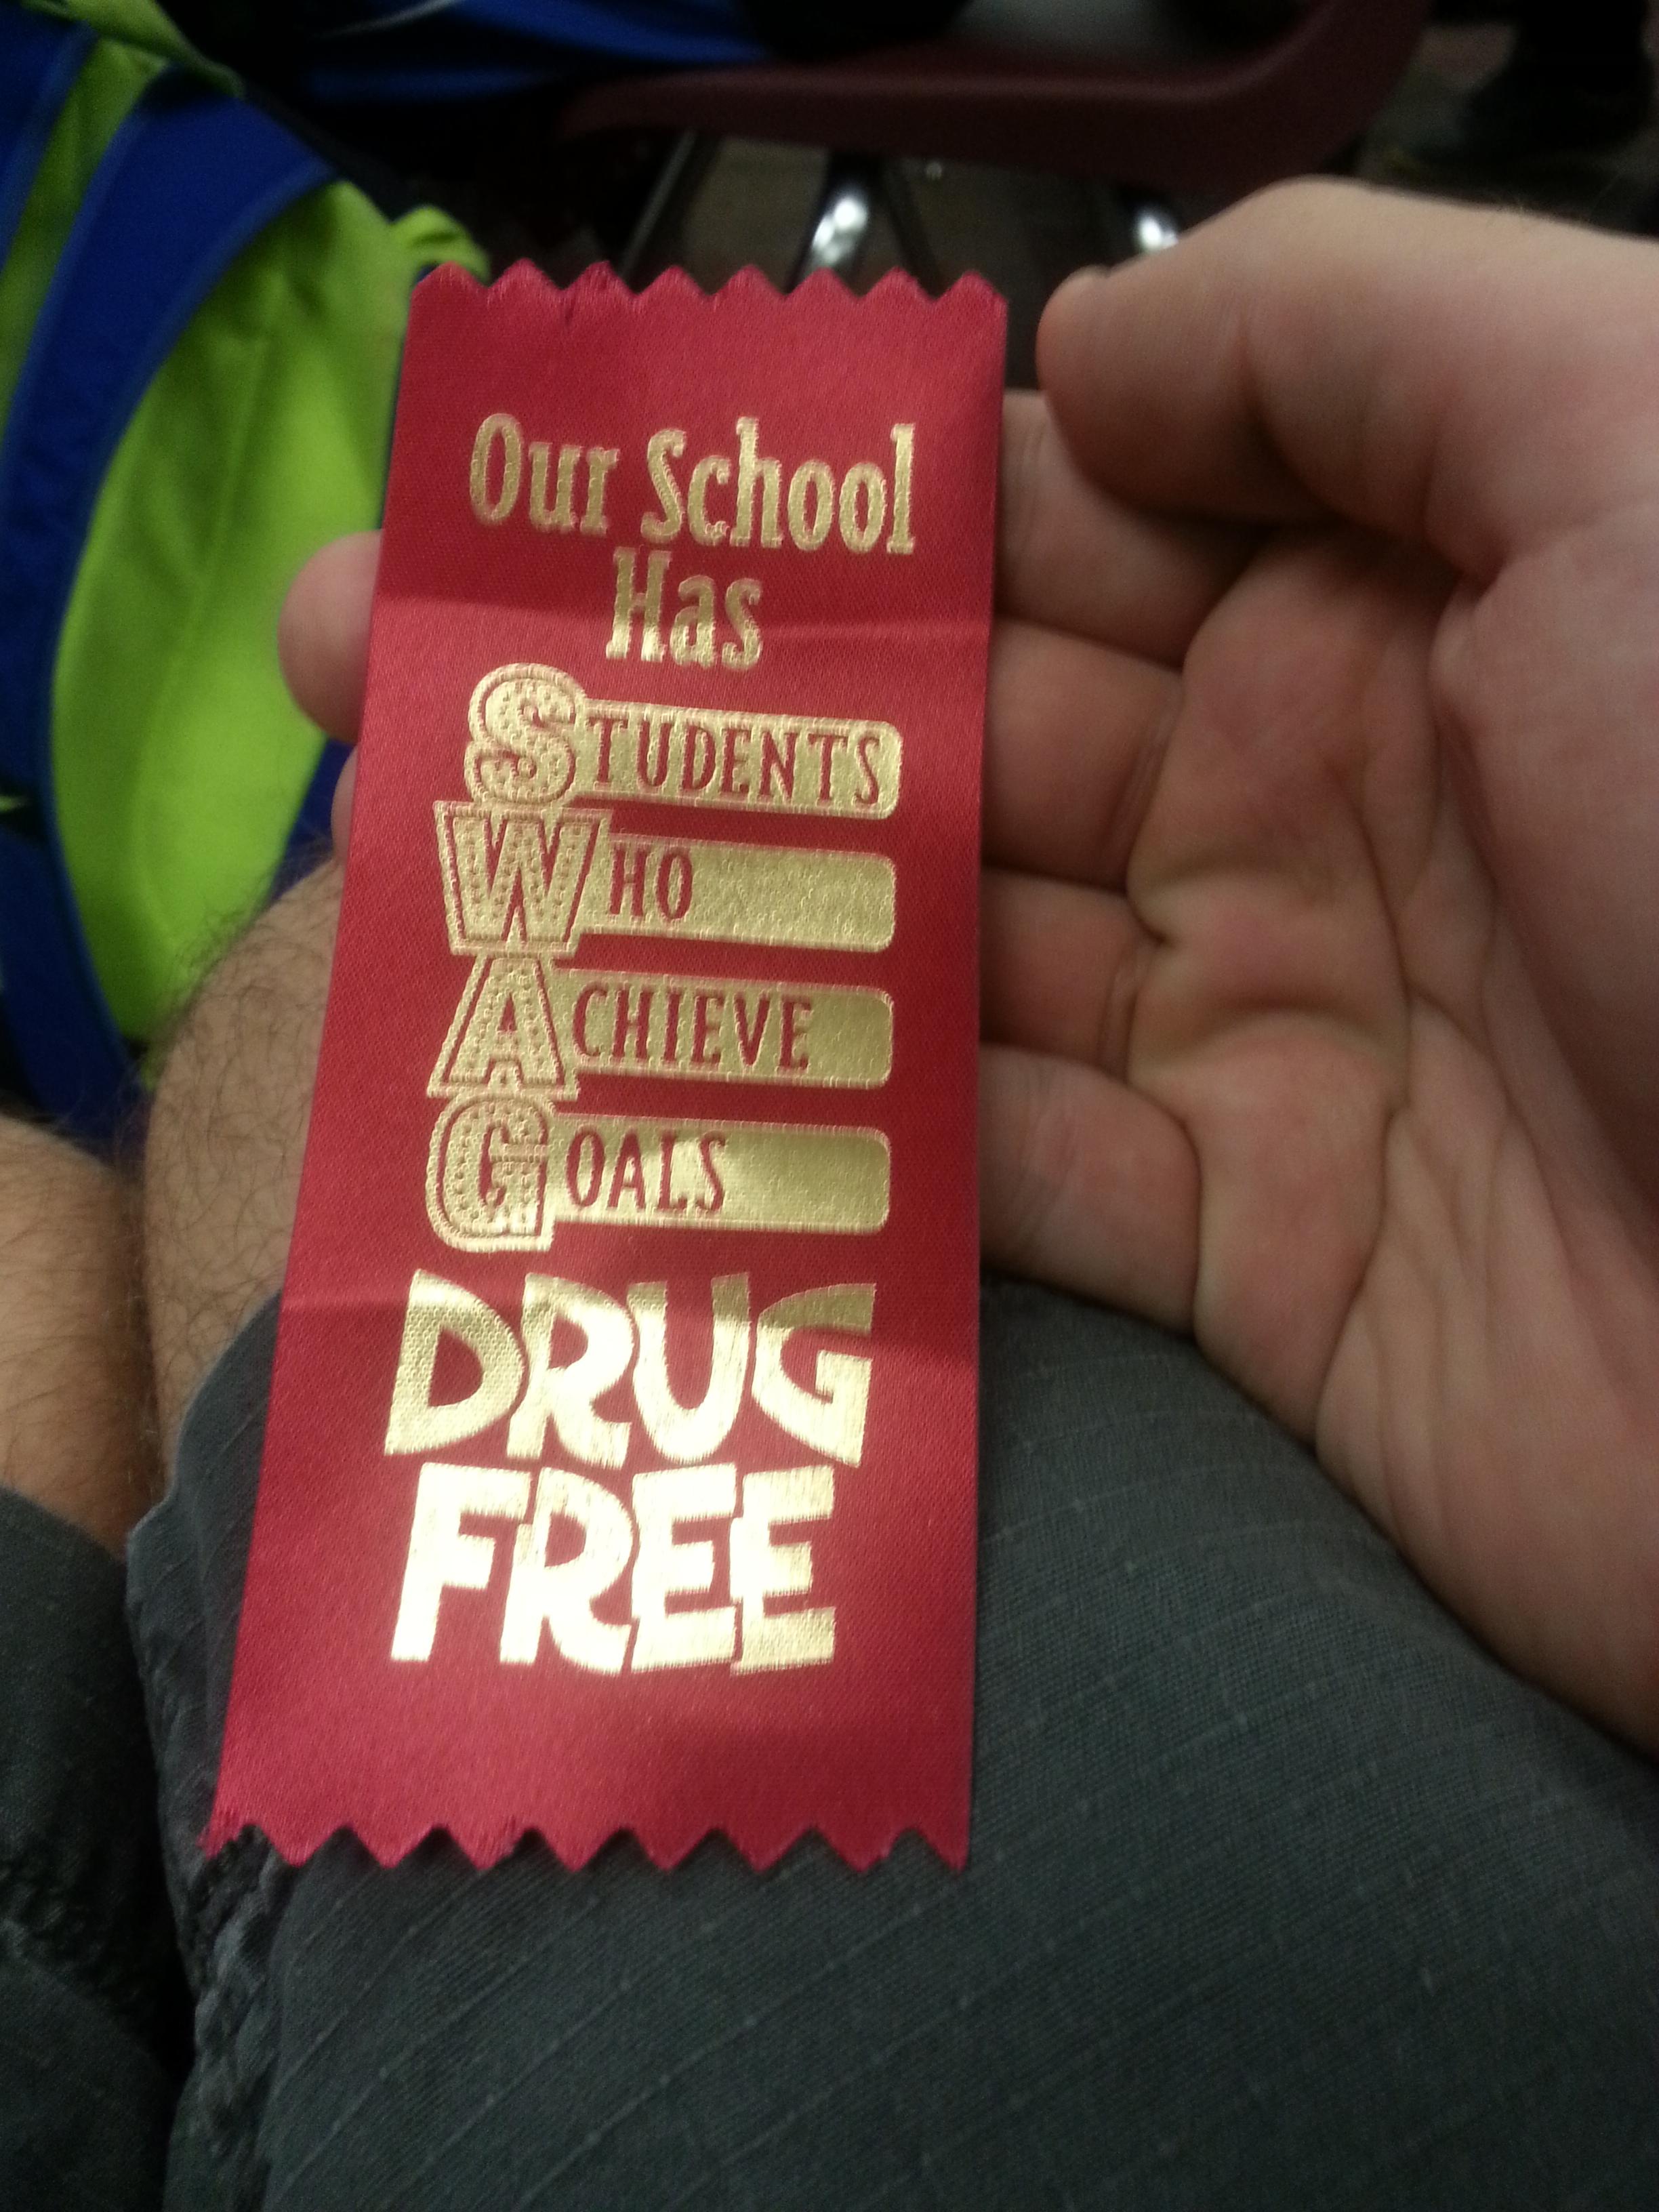 schools trying to be hip - Our School Has Students Ho Chieve Goals Drug Free